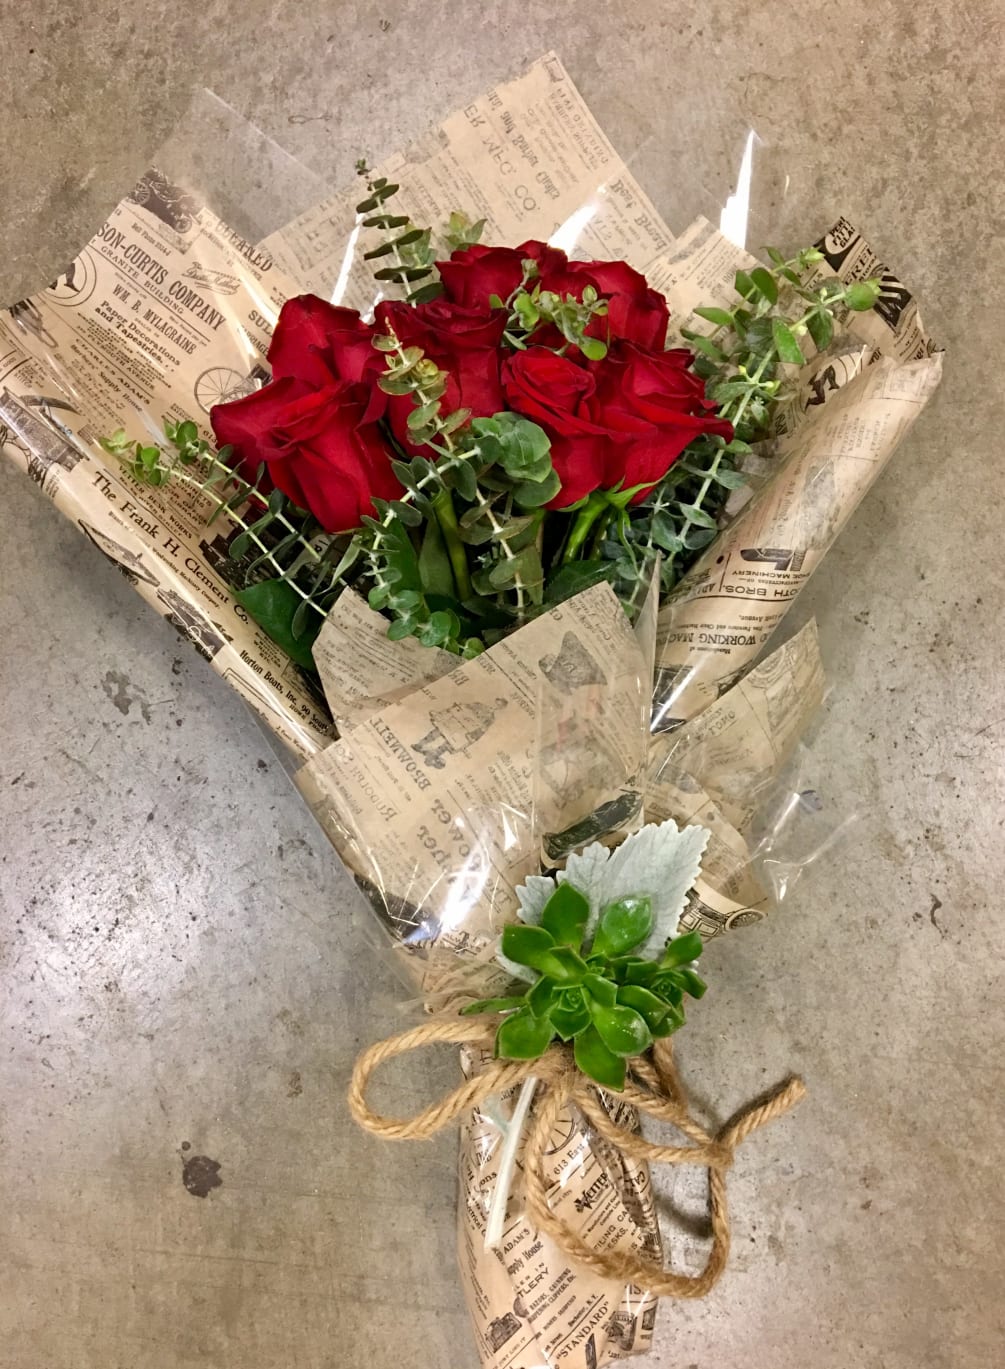 Dozen roses wrapped in classic newspapers tissue paper makes this bouquet uniqueelegant